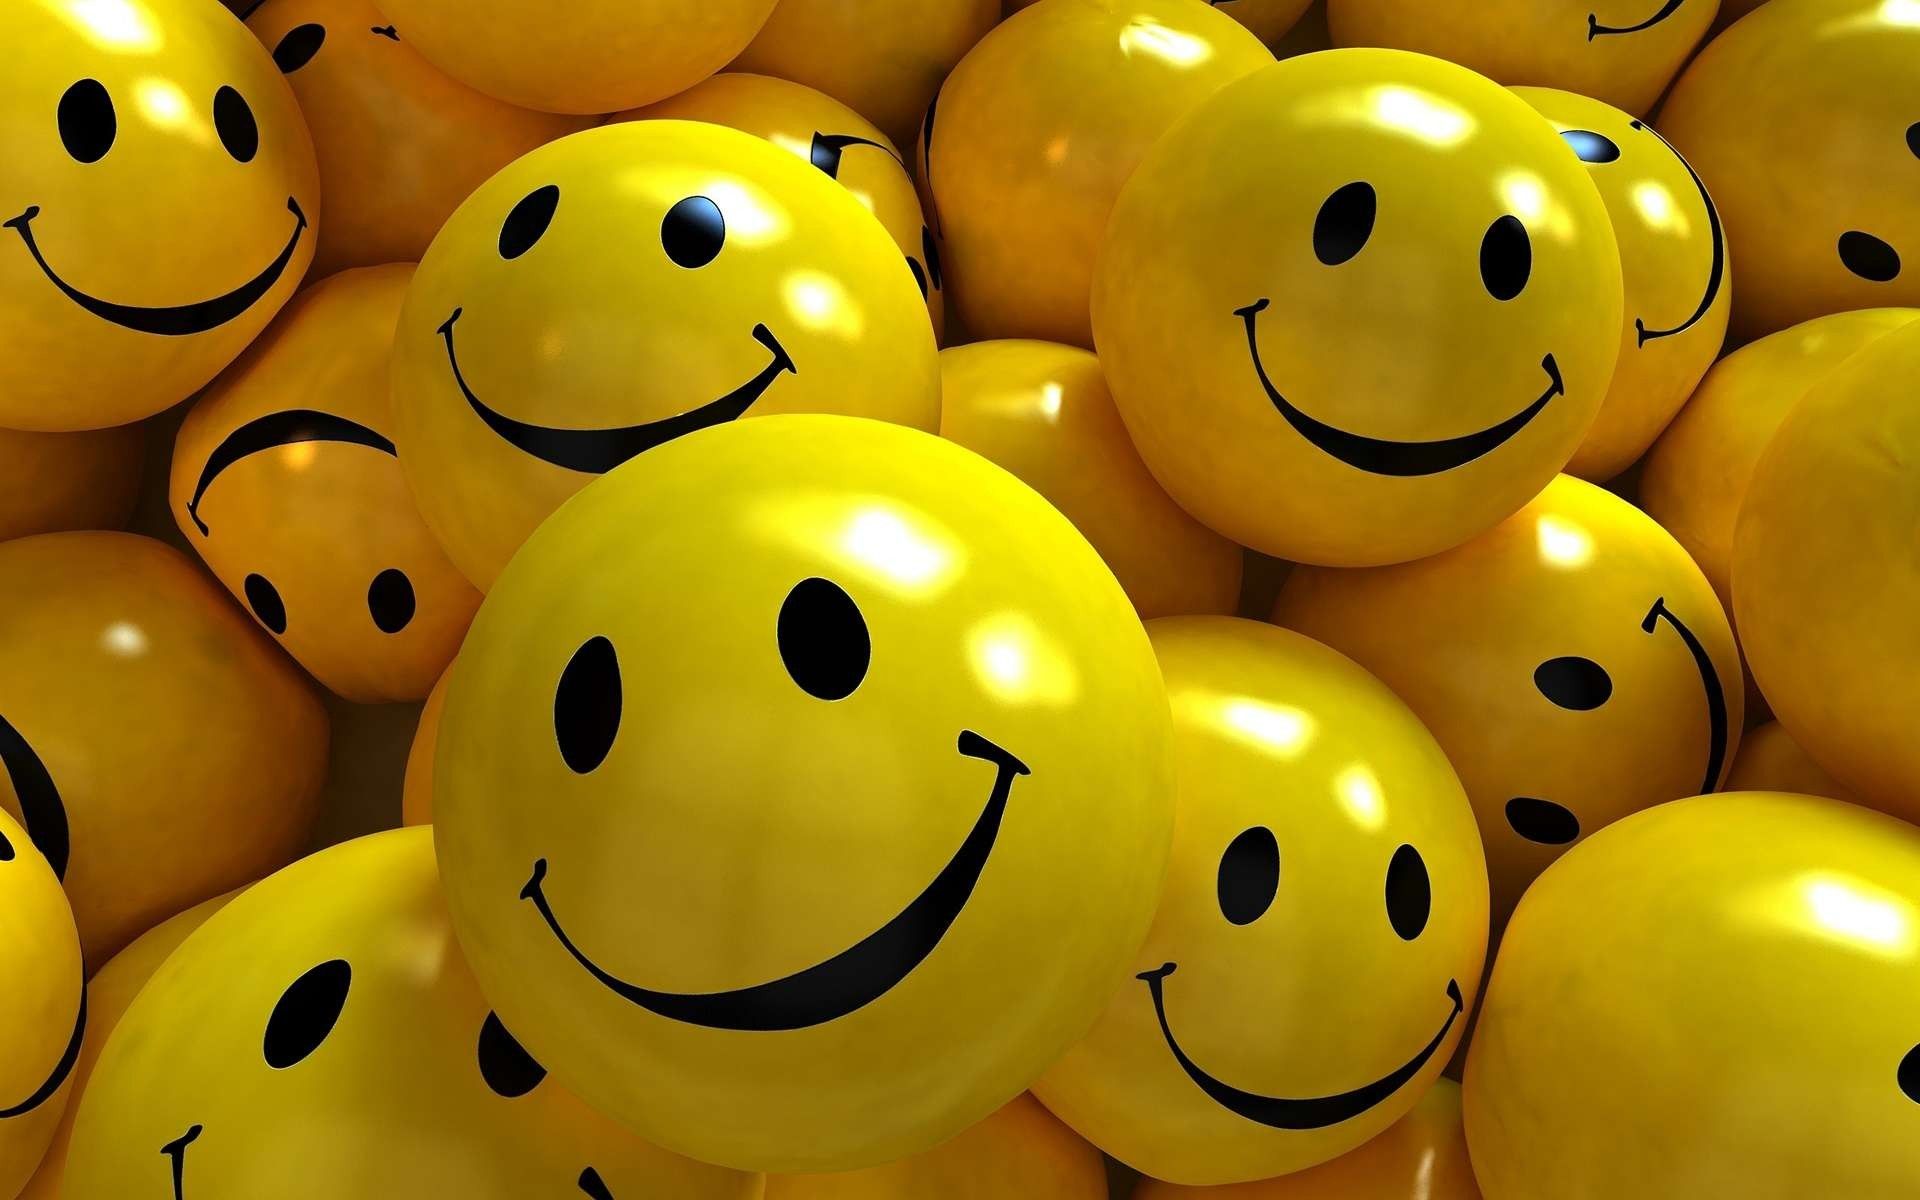 Big Smiley Face Wallpaper Free Big Smiley Face Background